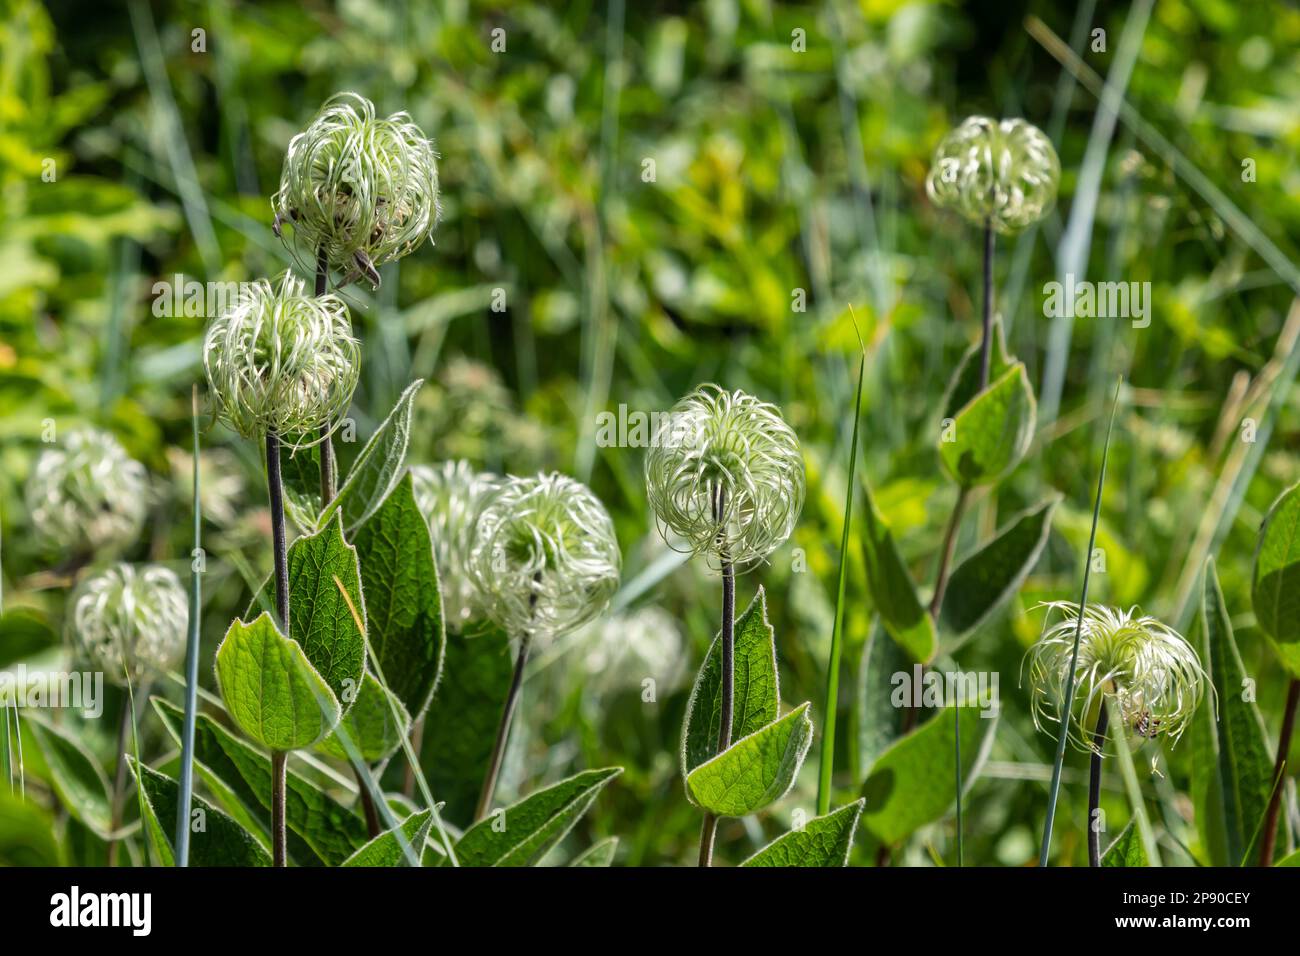 Group of seeds on stems Sugarbowls Leatherflowers in alpine field. Stock Photo